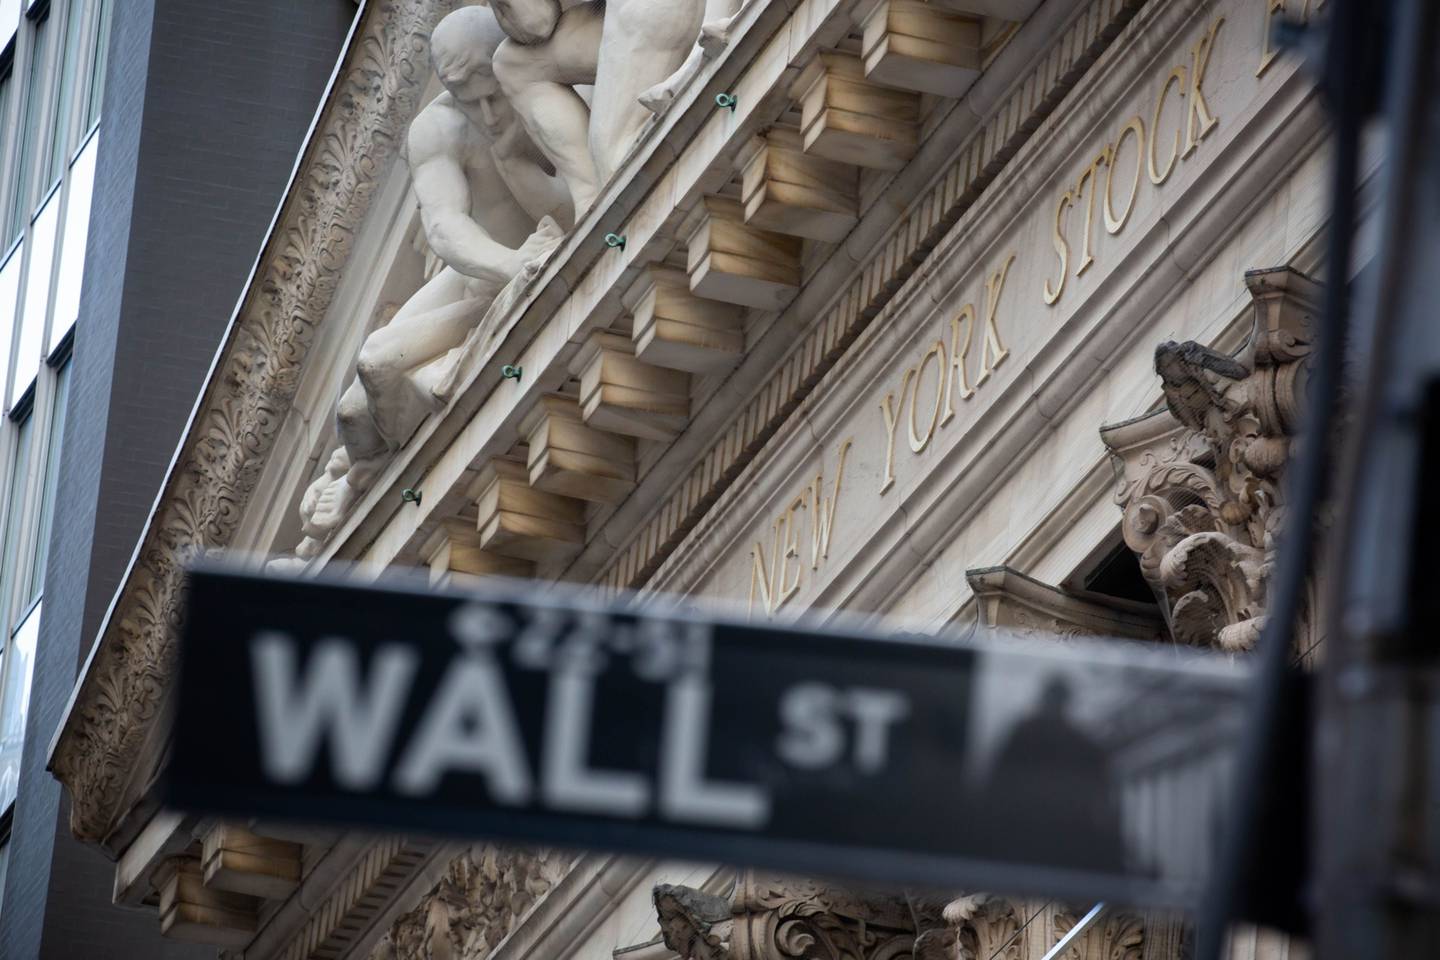 A Wall Street street sign in front of the New York Stock Exchange (NYSE) in New York, U.S.